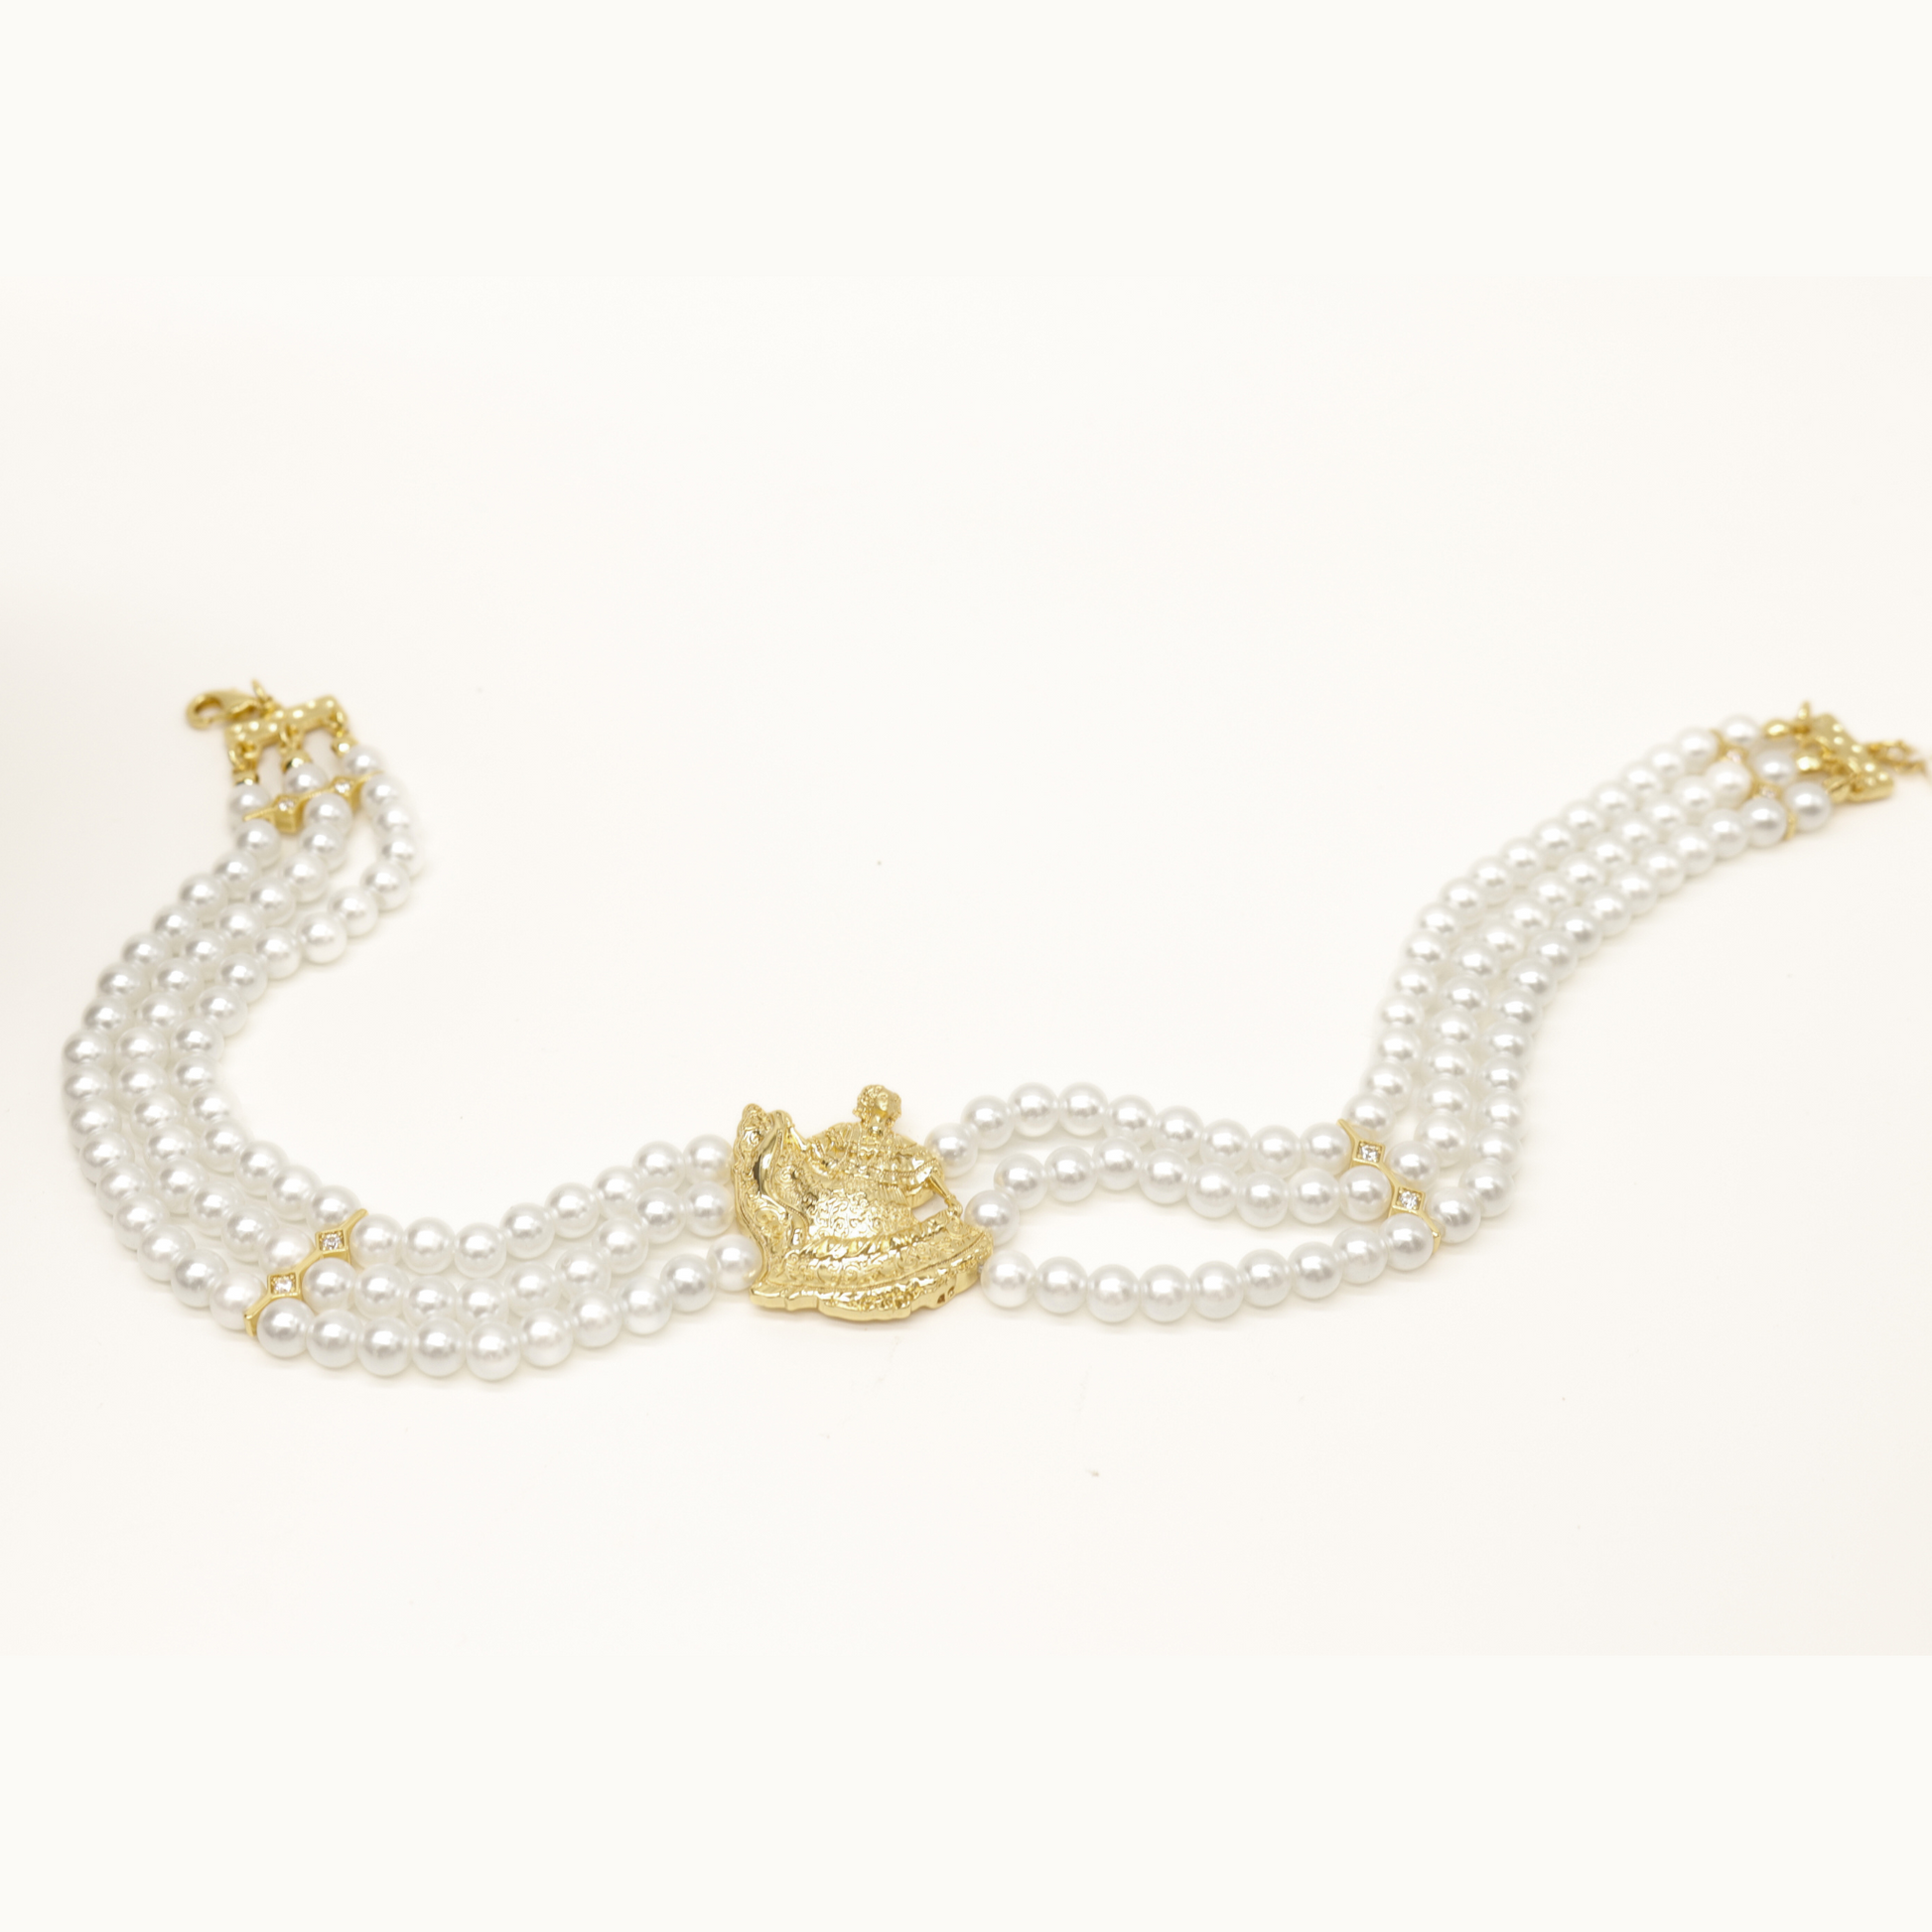 imitation pearl choker with gold plated pollera dancer pendant laid flat on table